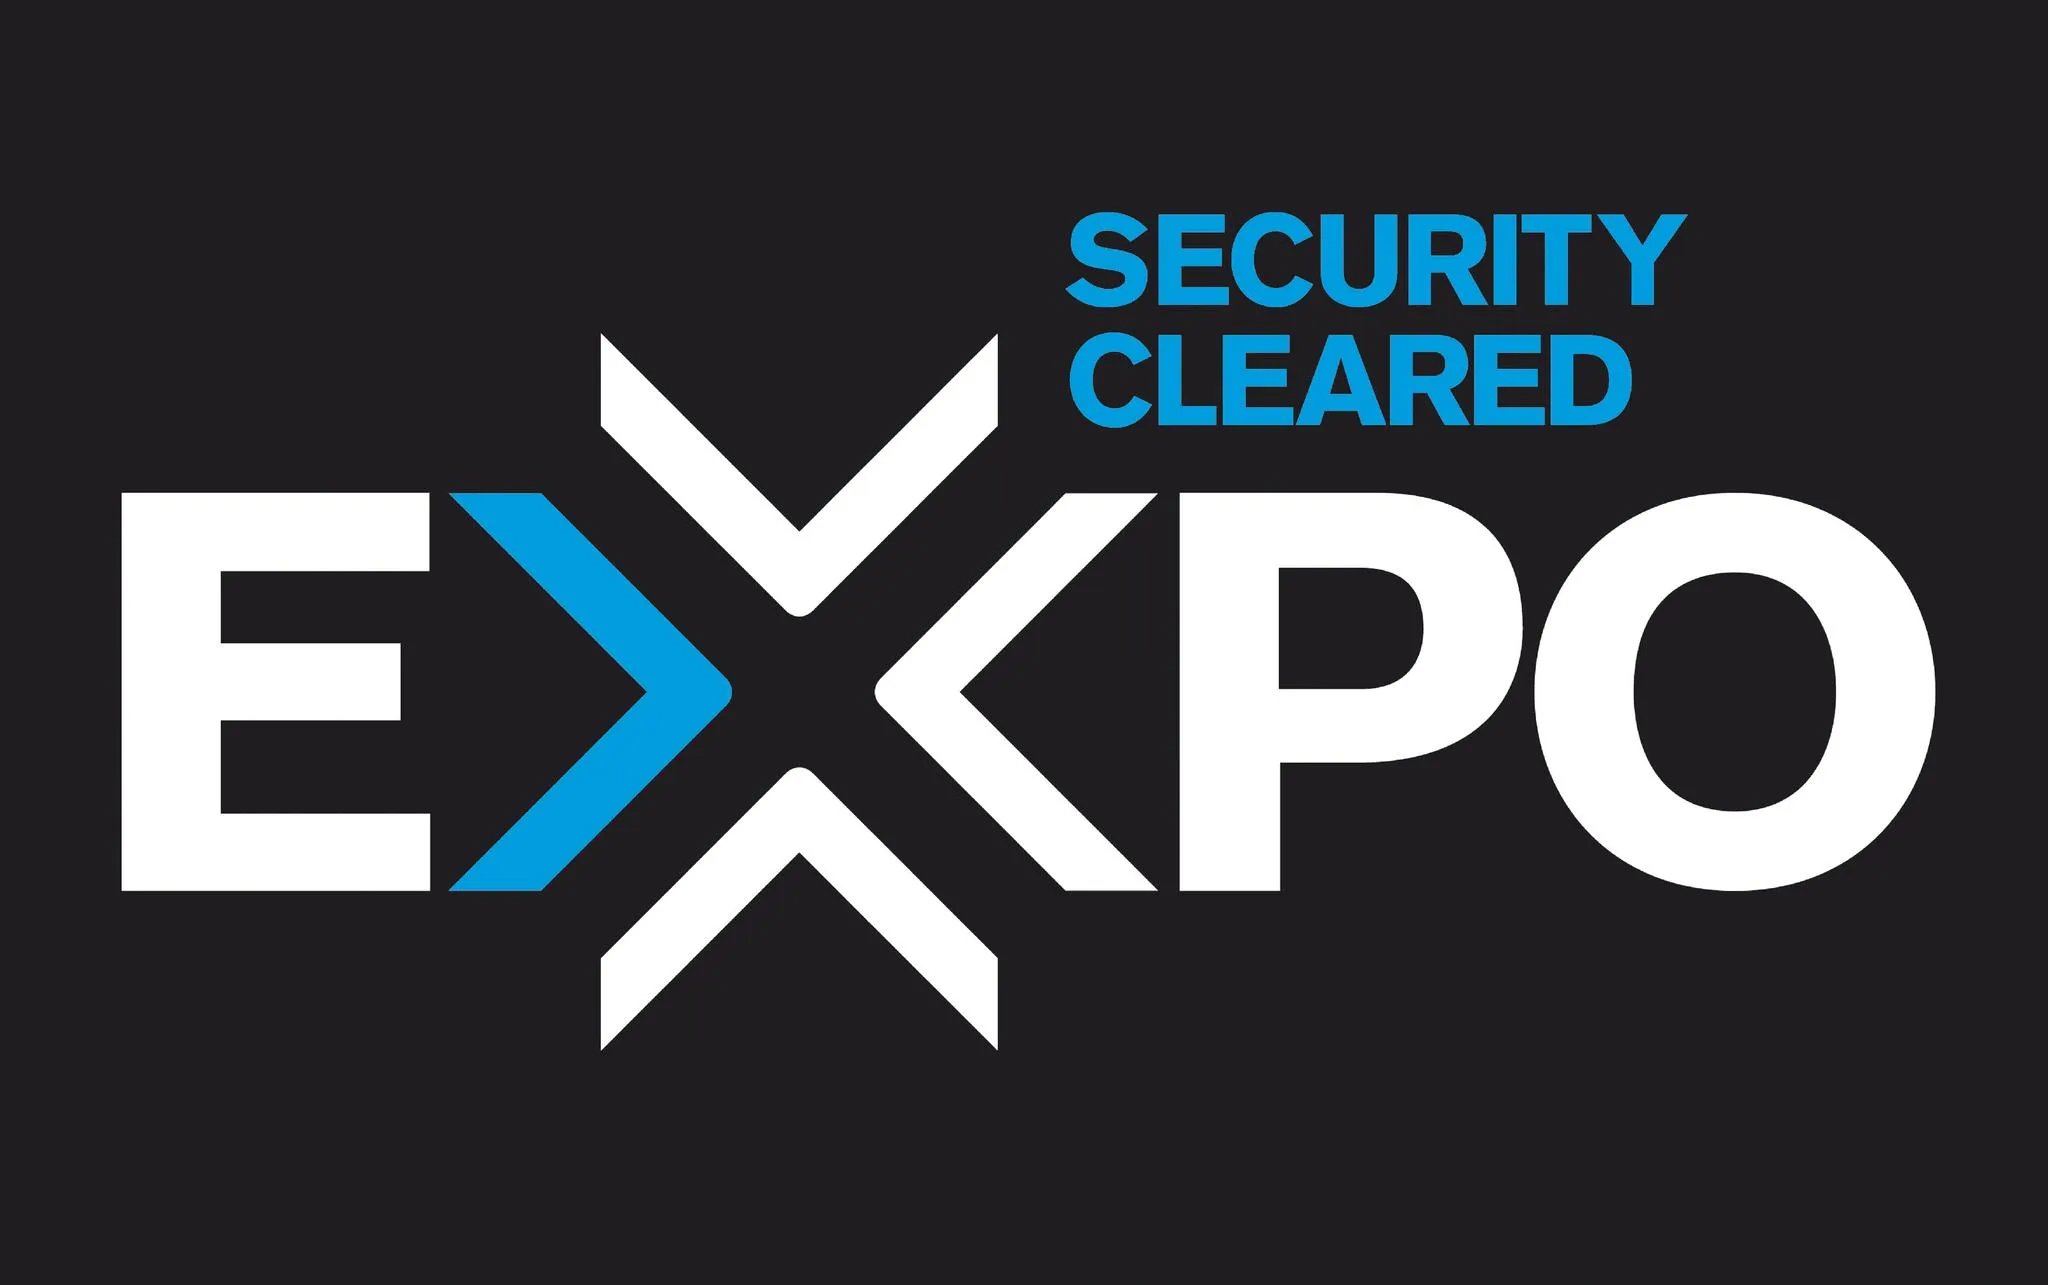 Security Cleared Expo